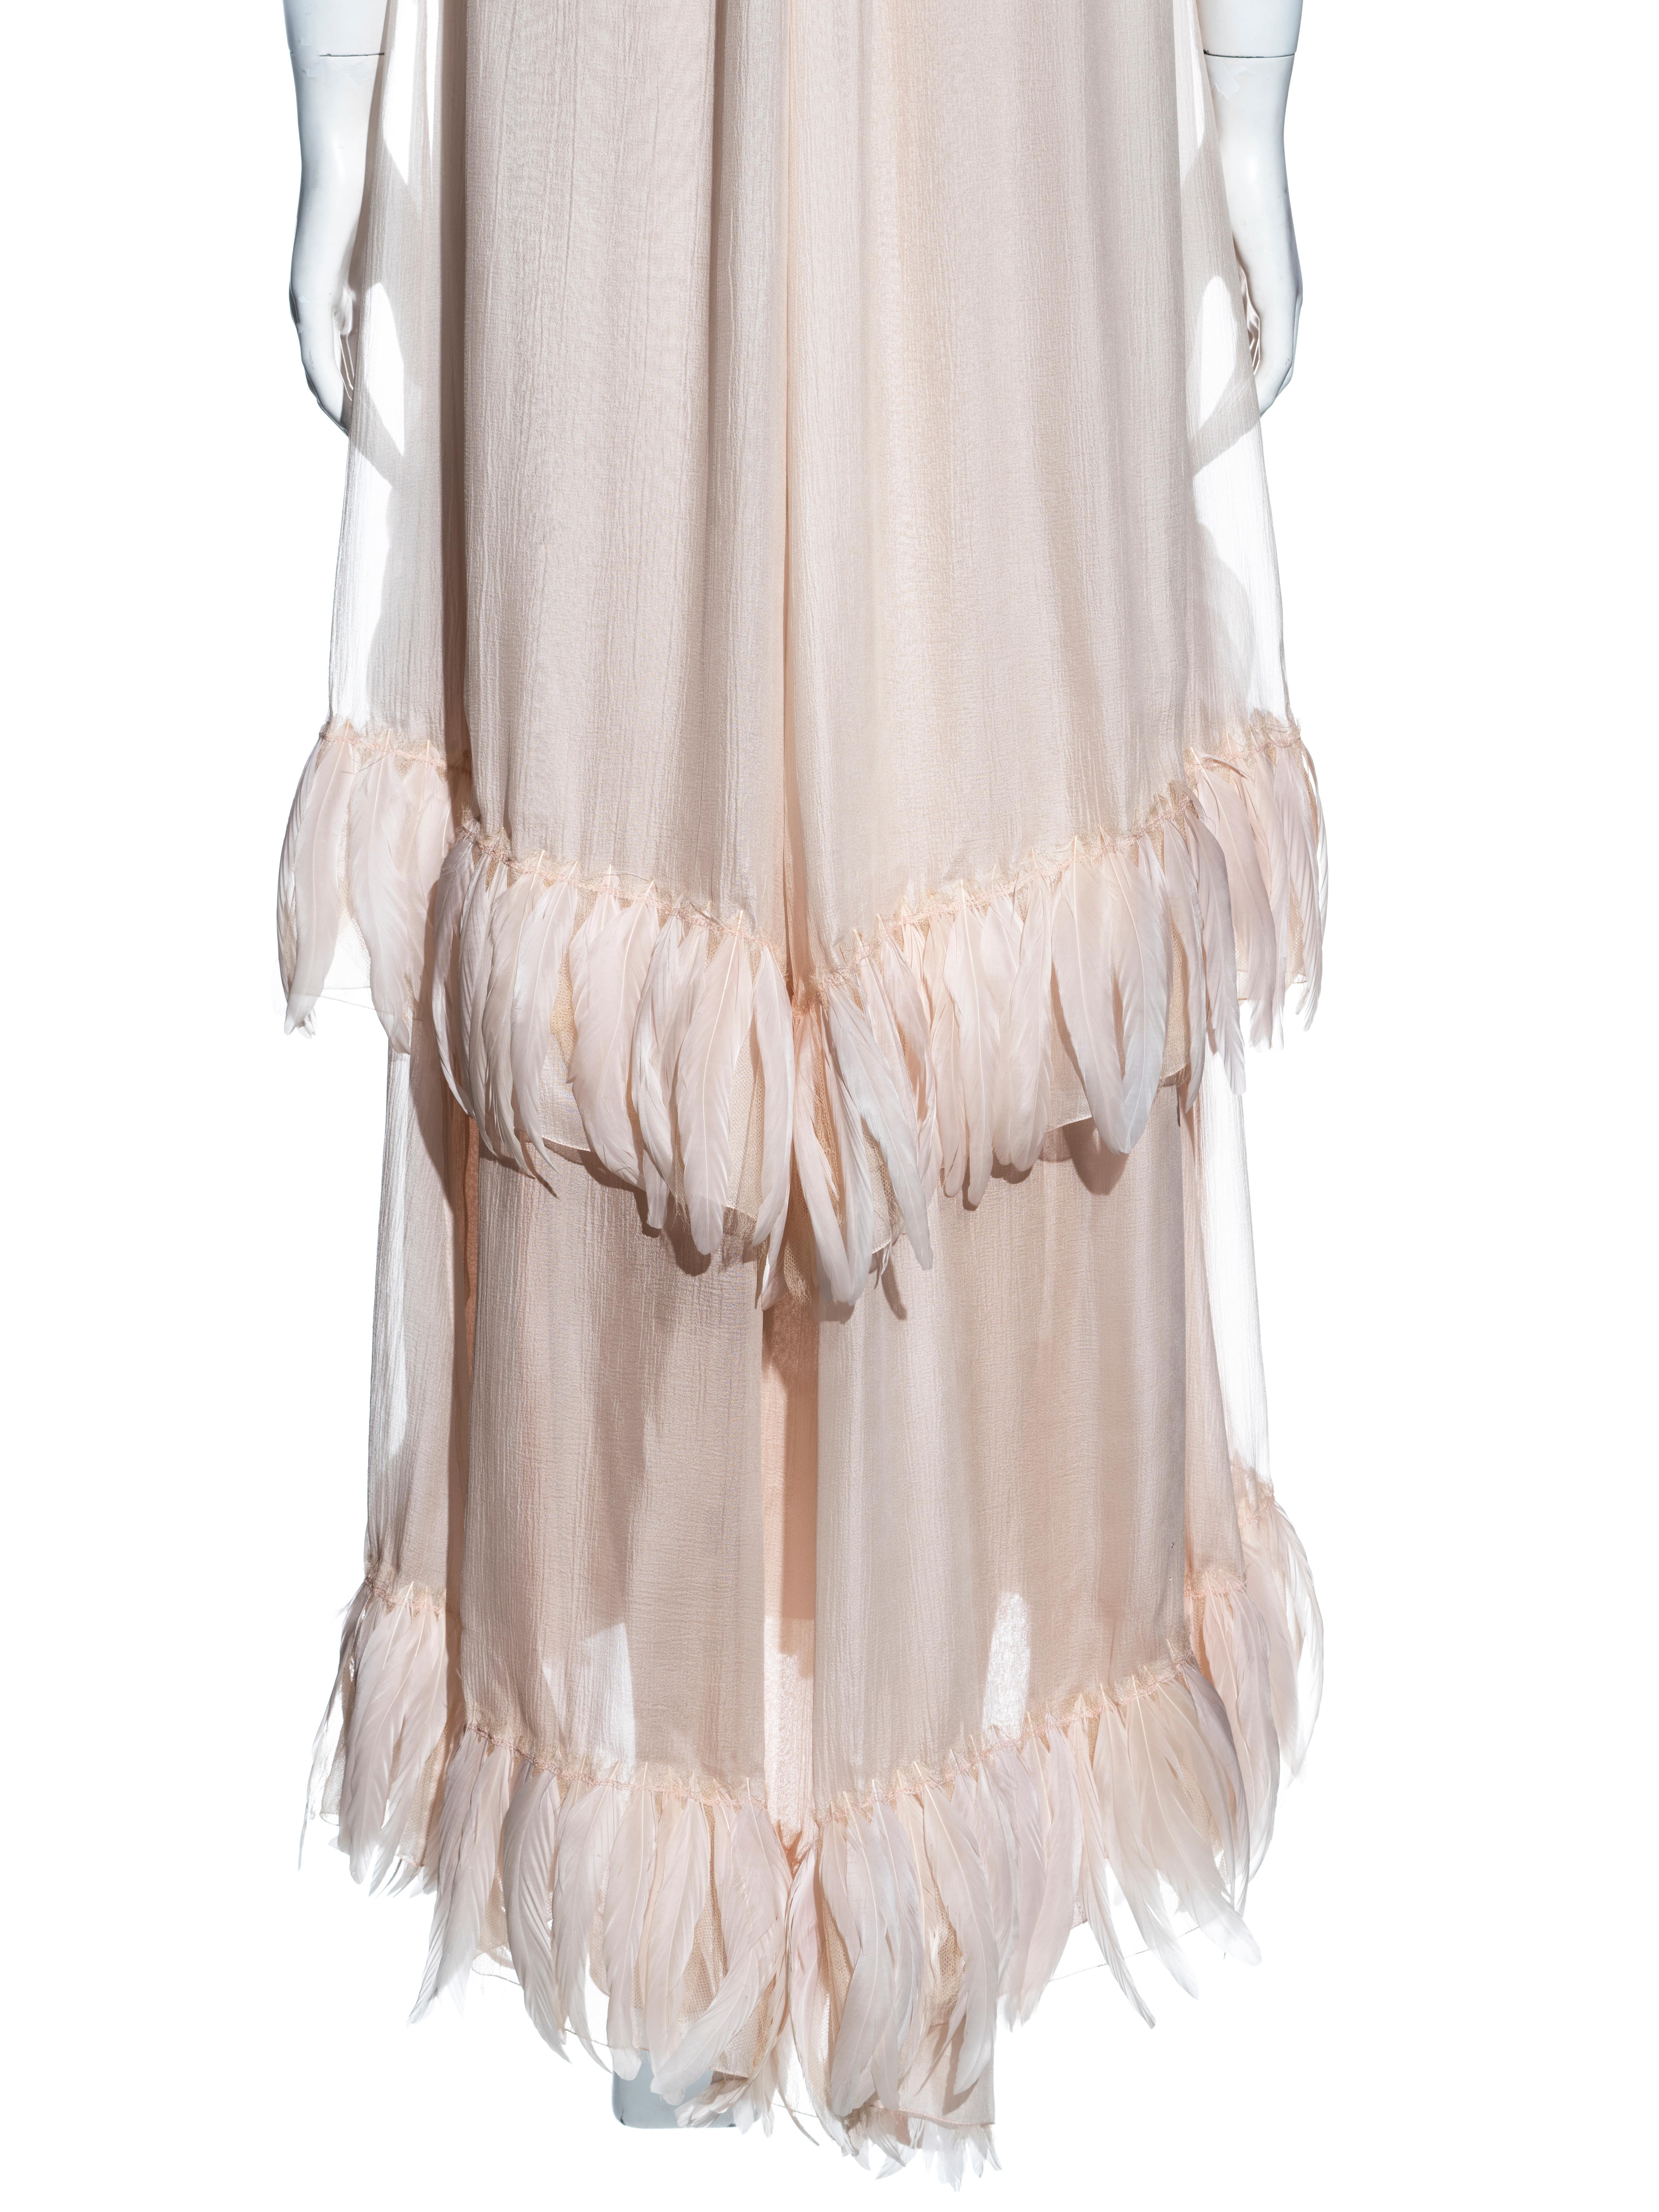 Chanel by Karl Lagerfeld silk chiffon evening dress with feathers, cr 2009 8